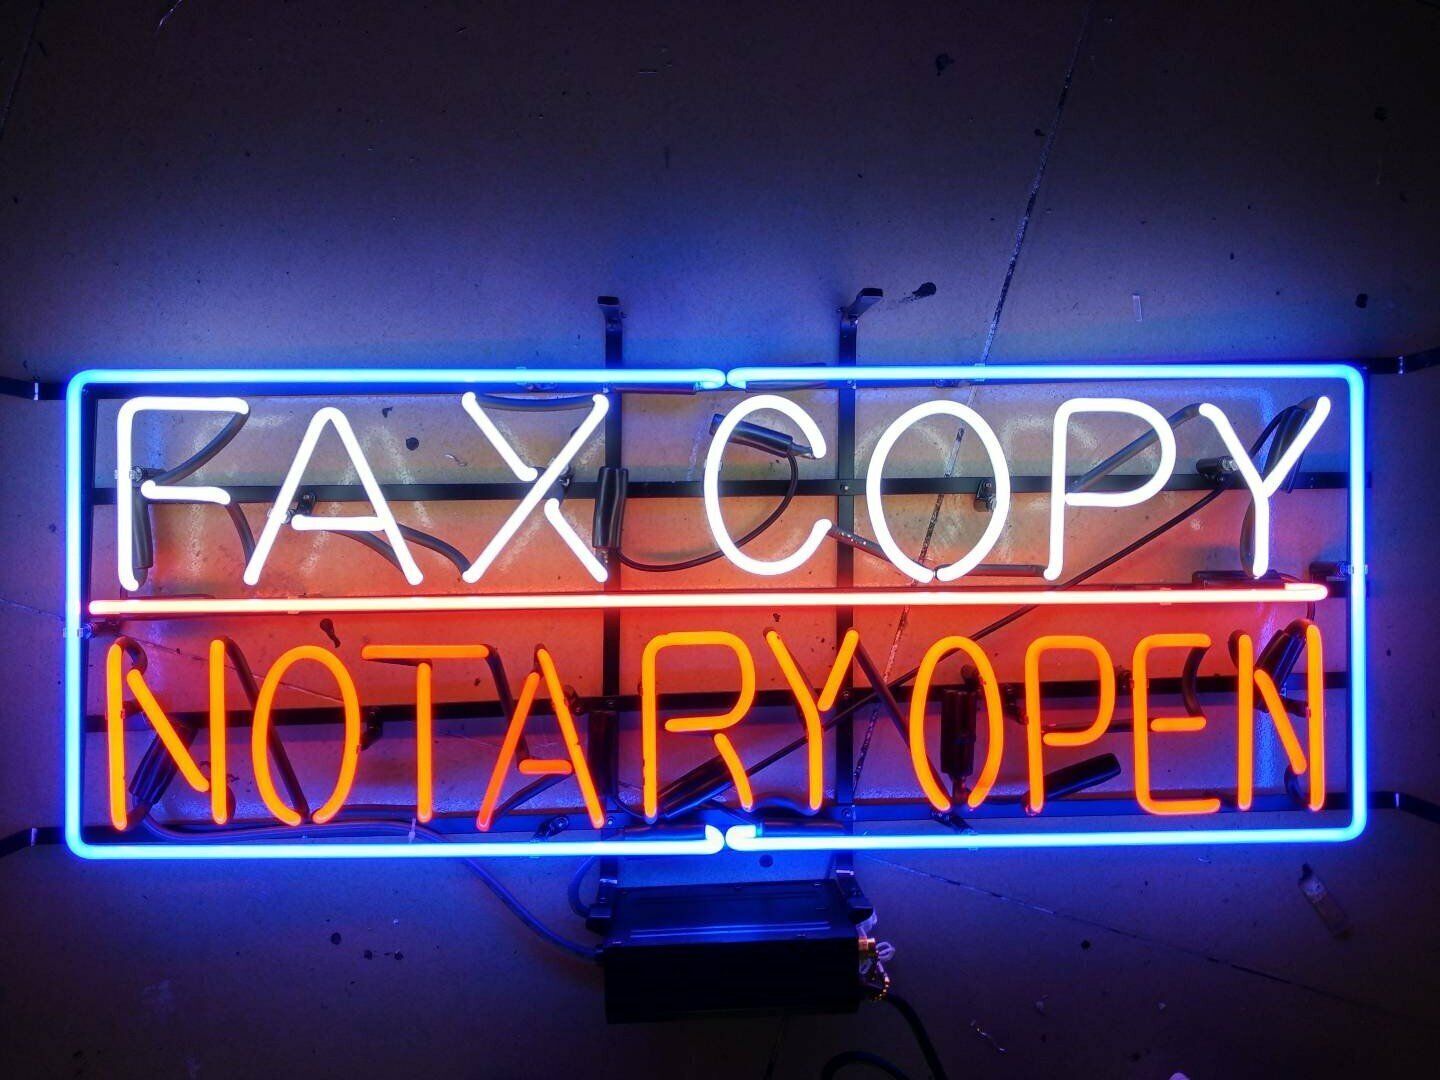 New Fax Copy Notary Open Neon Light Sign 24\